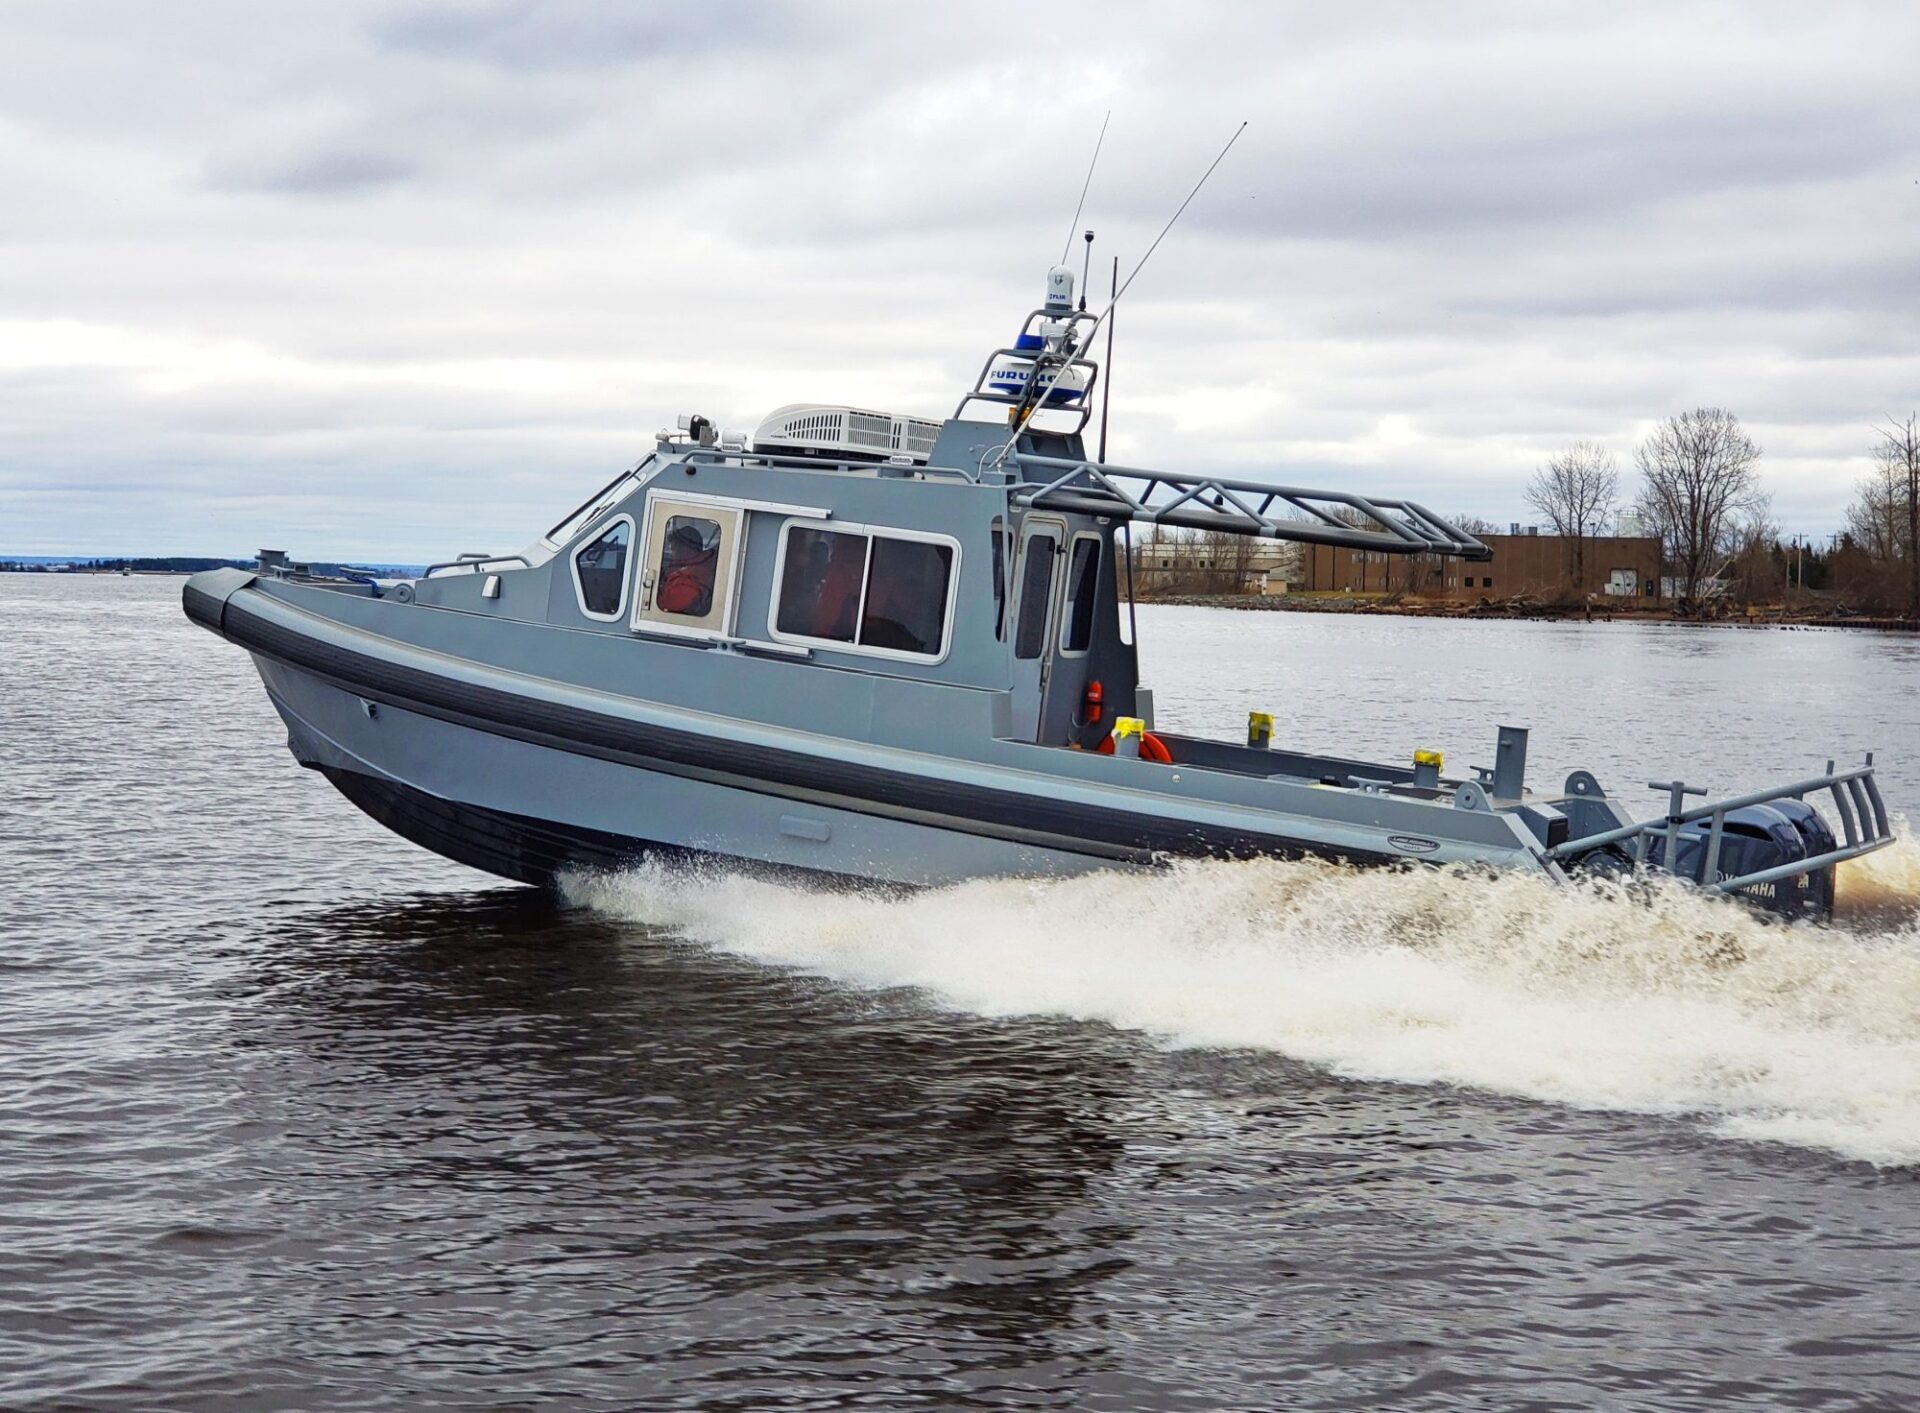 Lake Assault Boats Delivers the First of up to 119 Anti-Terrorism Patrol Craft to the U.S. Navy